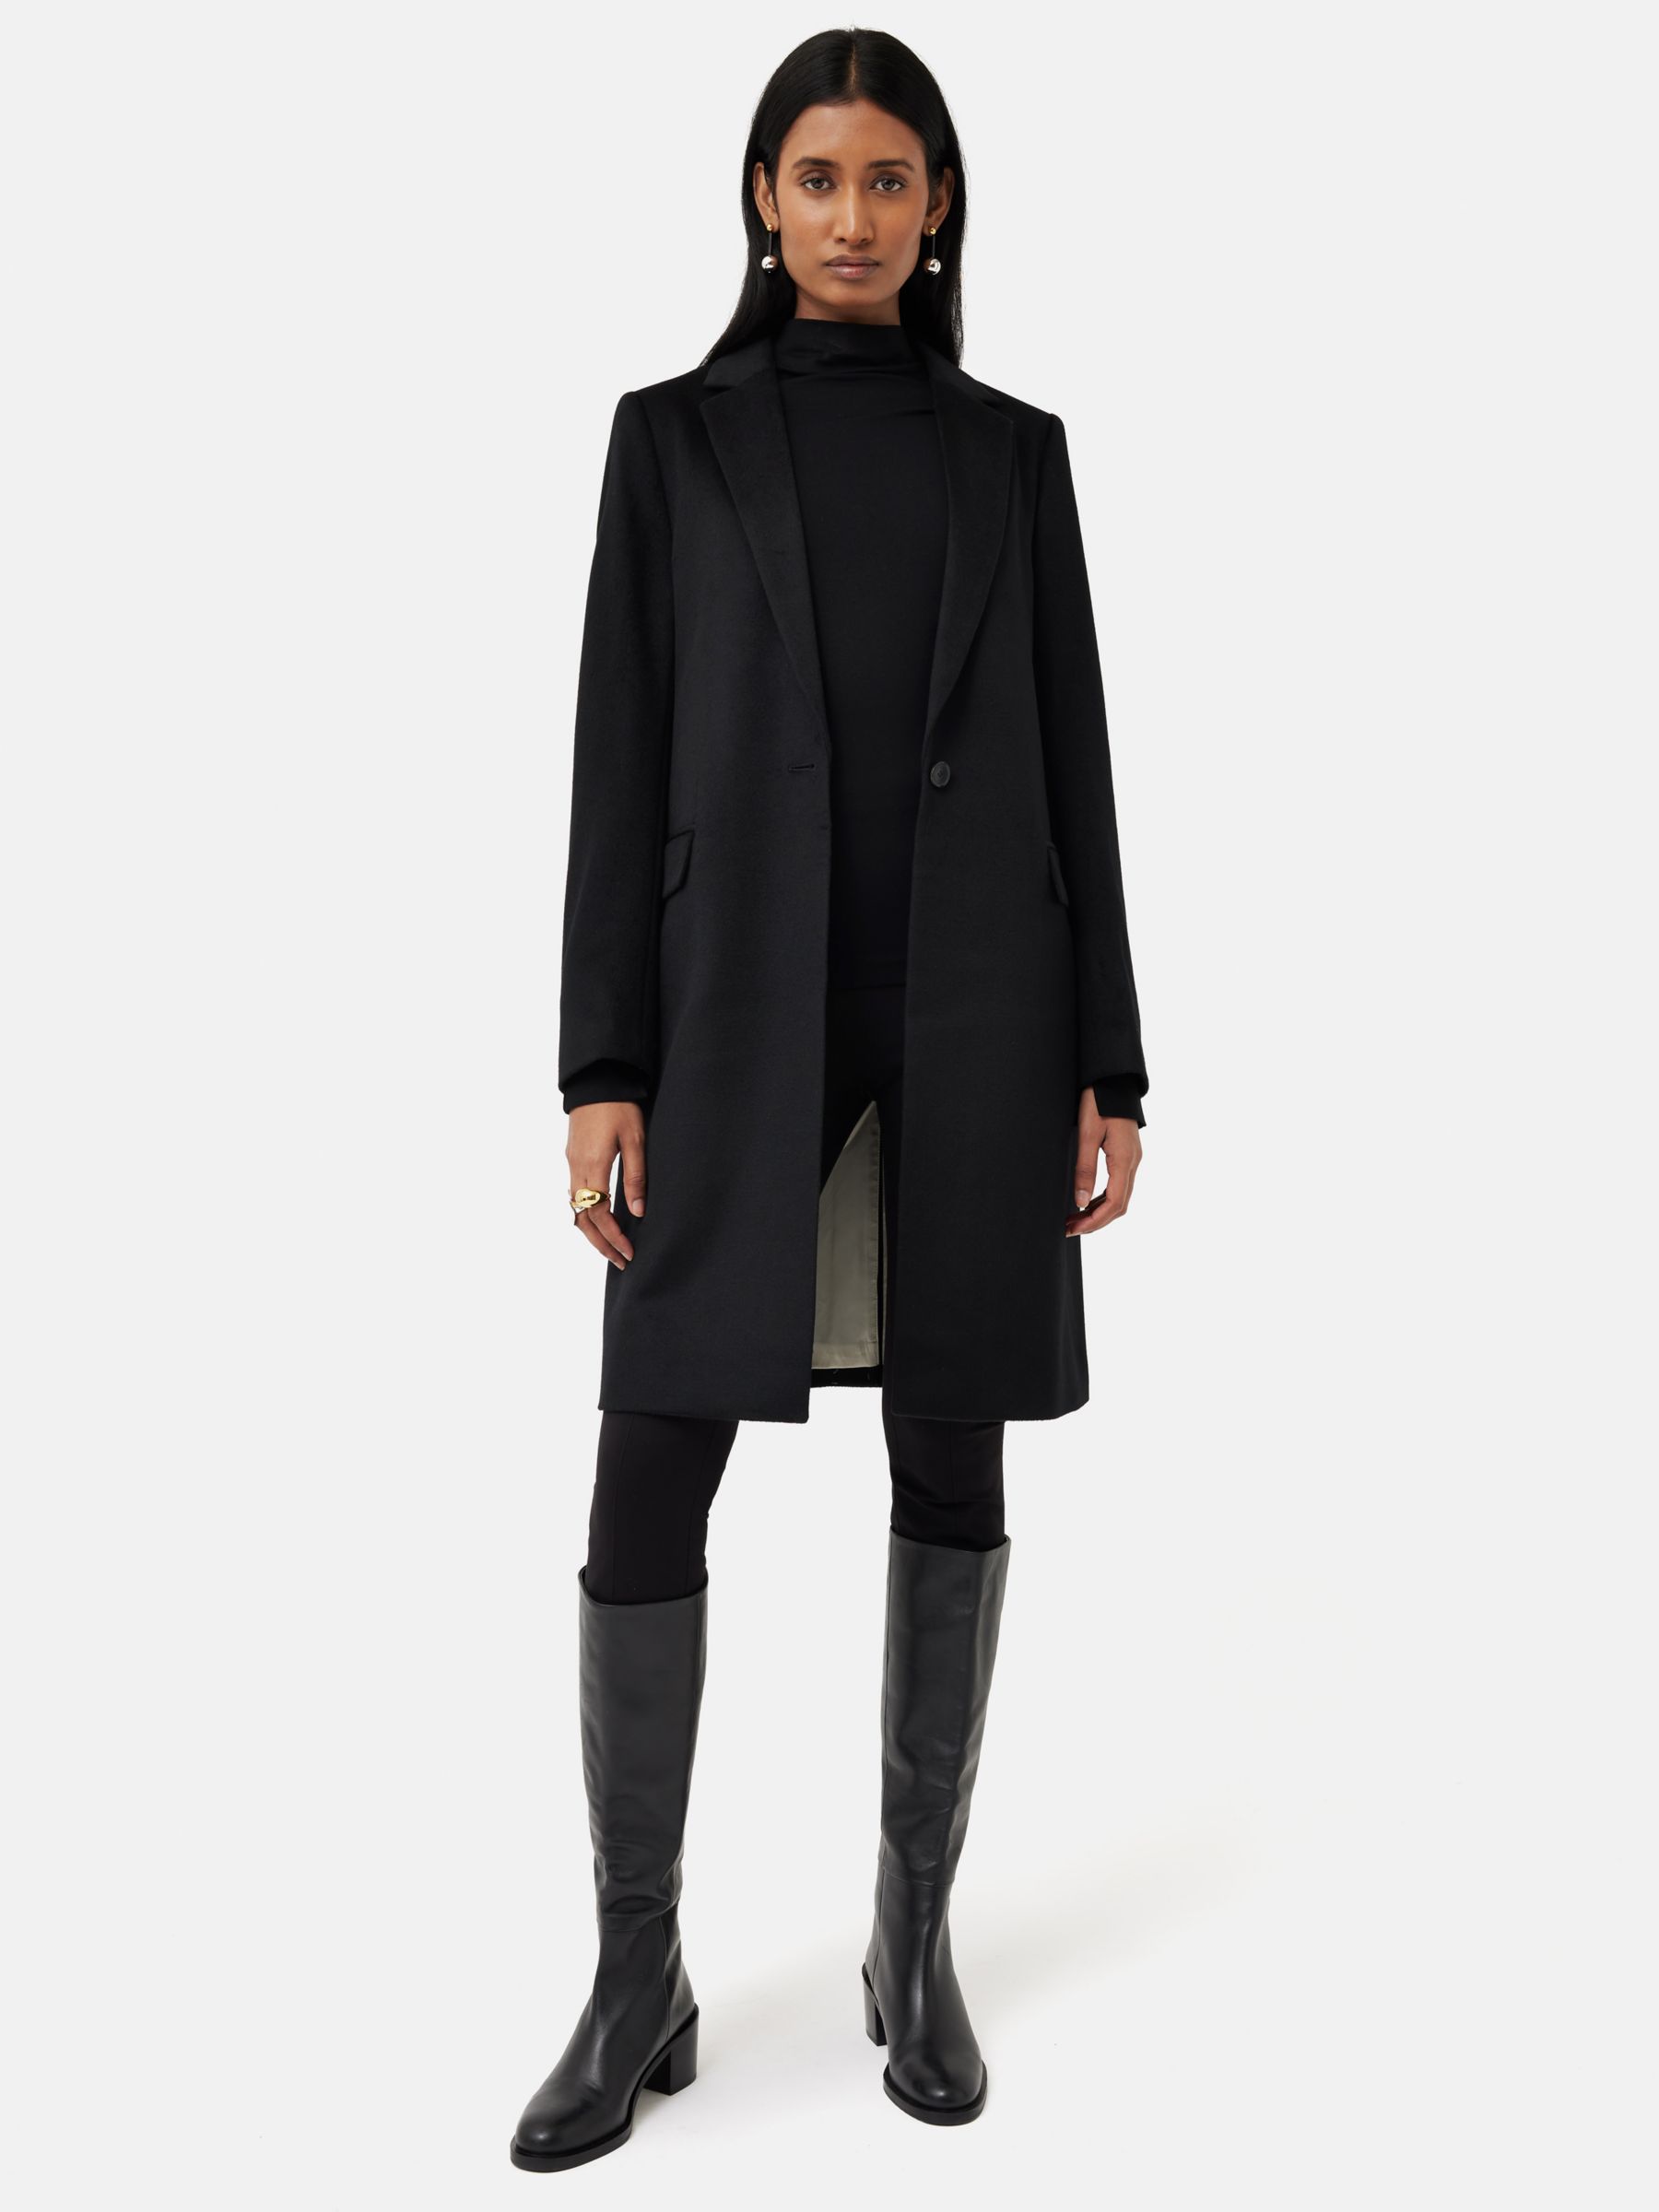 Jigsaw Relaxed Wool Tailored City Coat, Black at John Lewis & Partners